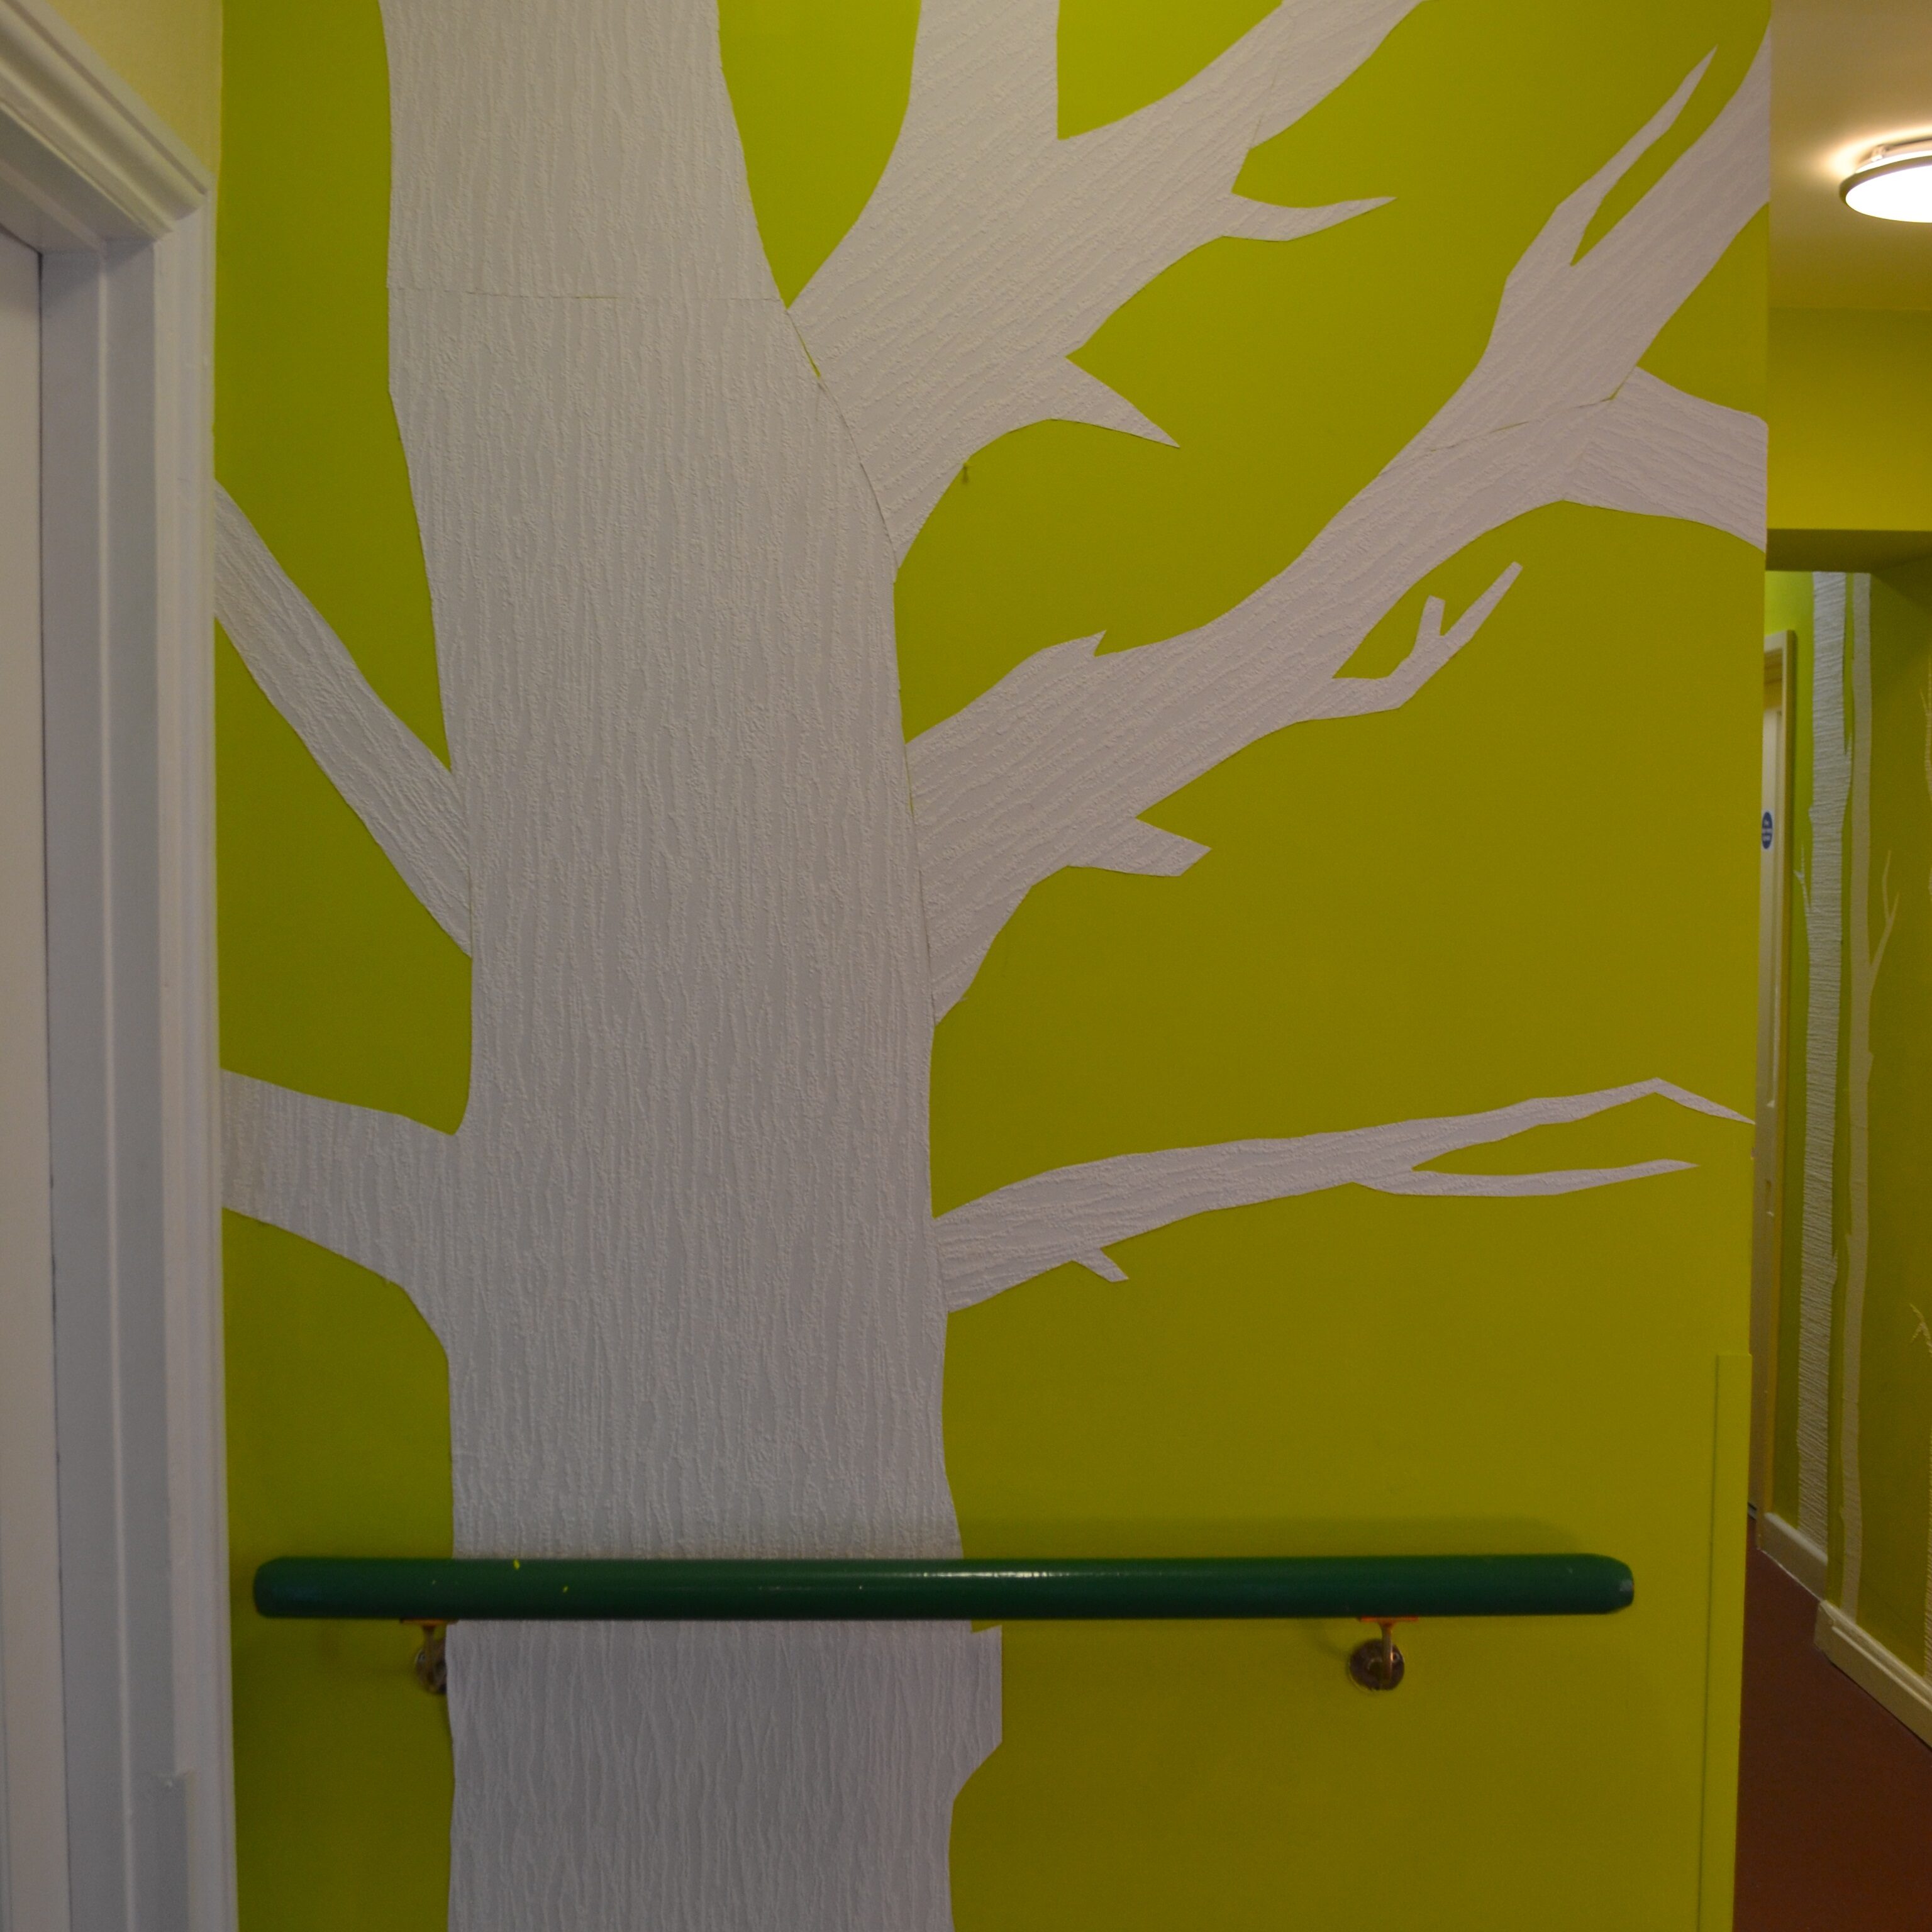 Shows green painted background with paper tree in white.